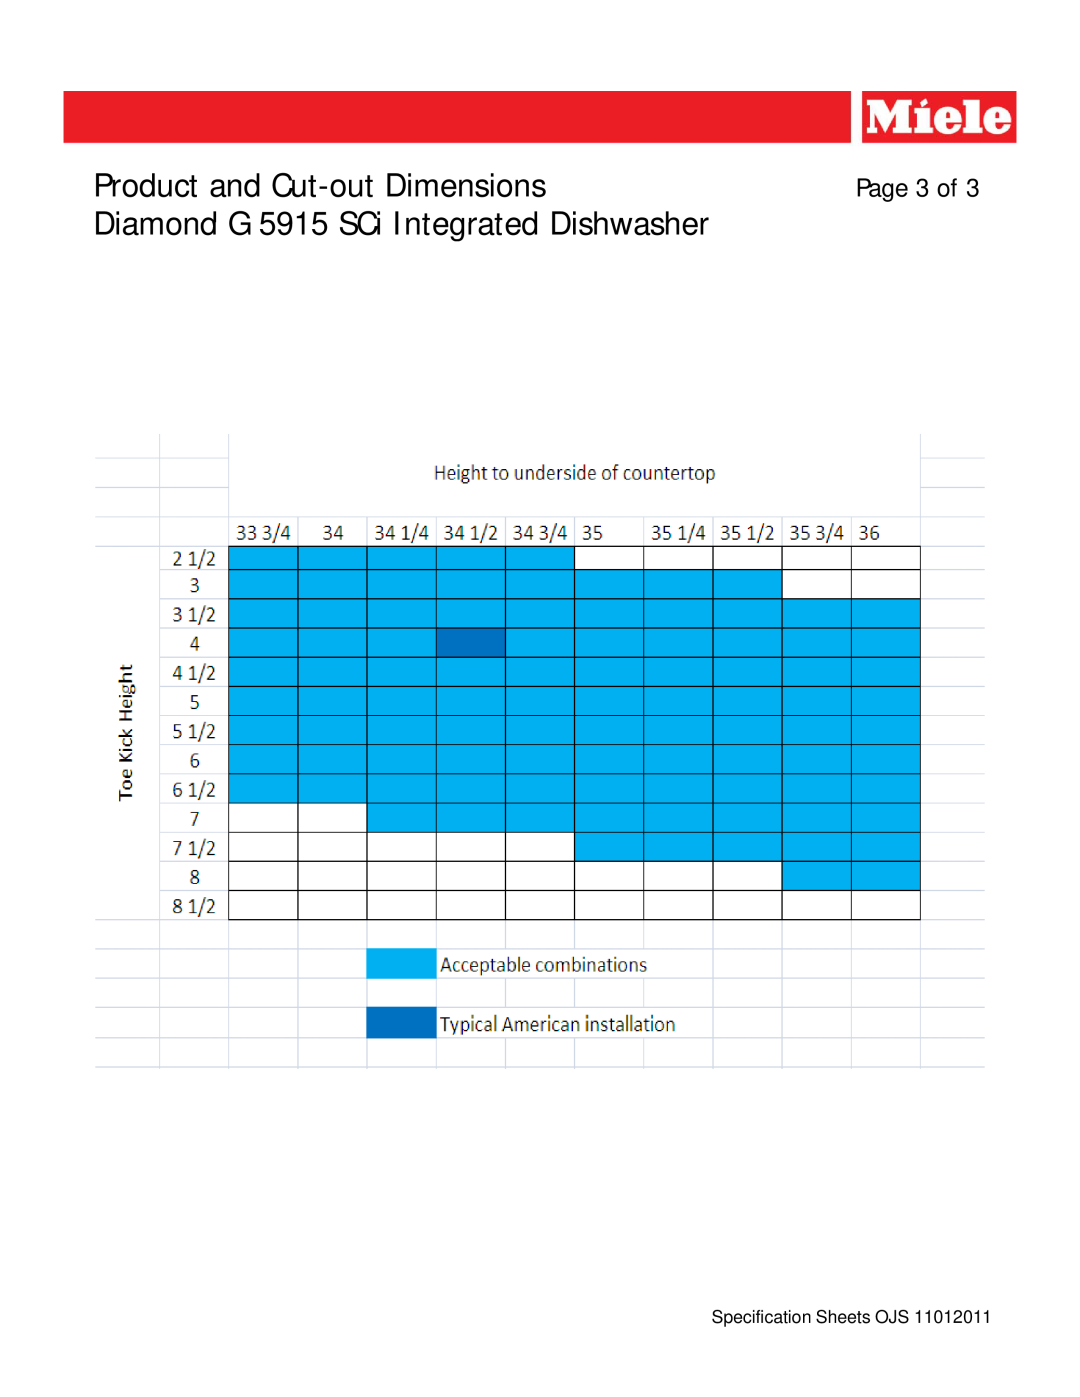 Miele G 5915 SCI dimensions Page 3 of, Product and Cut-outDimensions, Diamond G 5915 SCi Integrated Dishwasher 